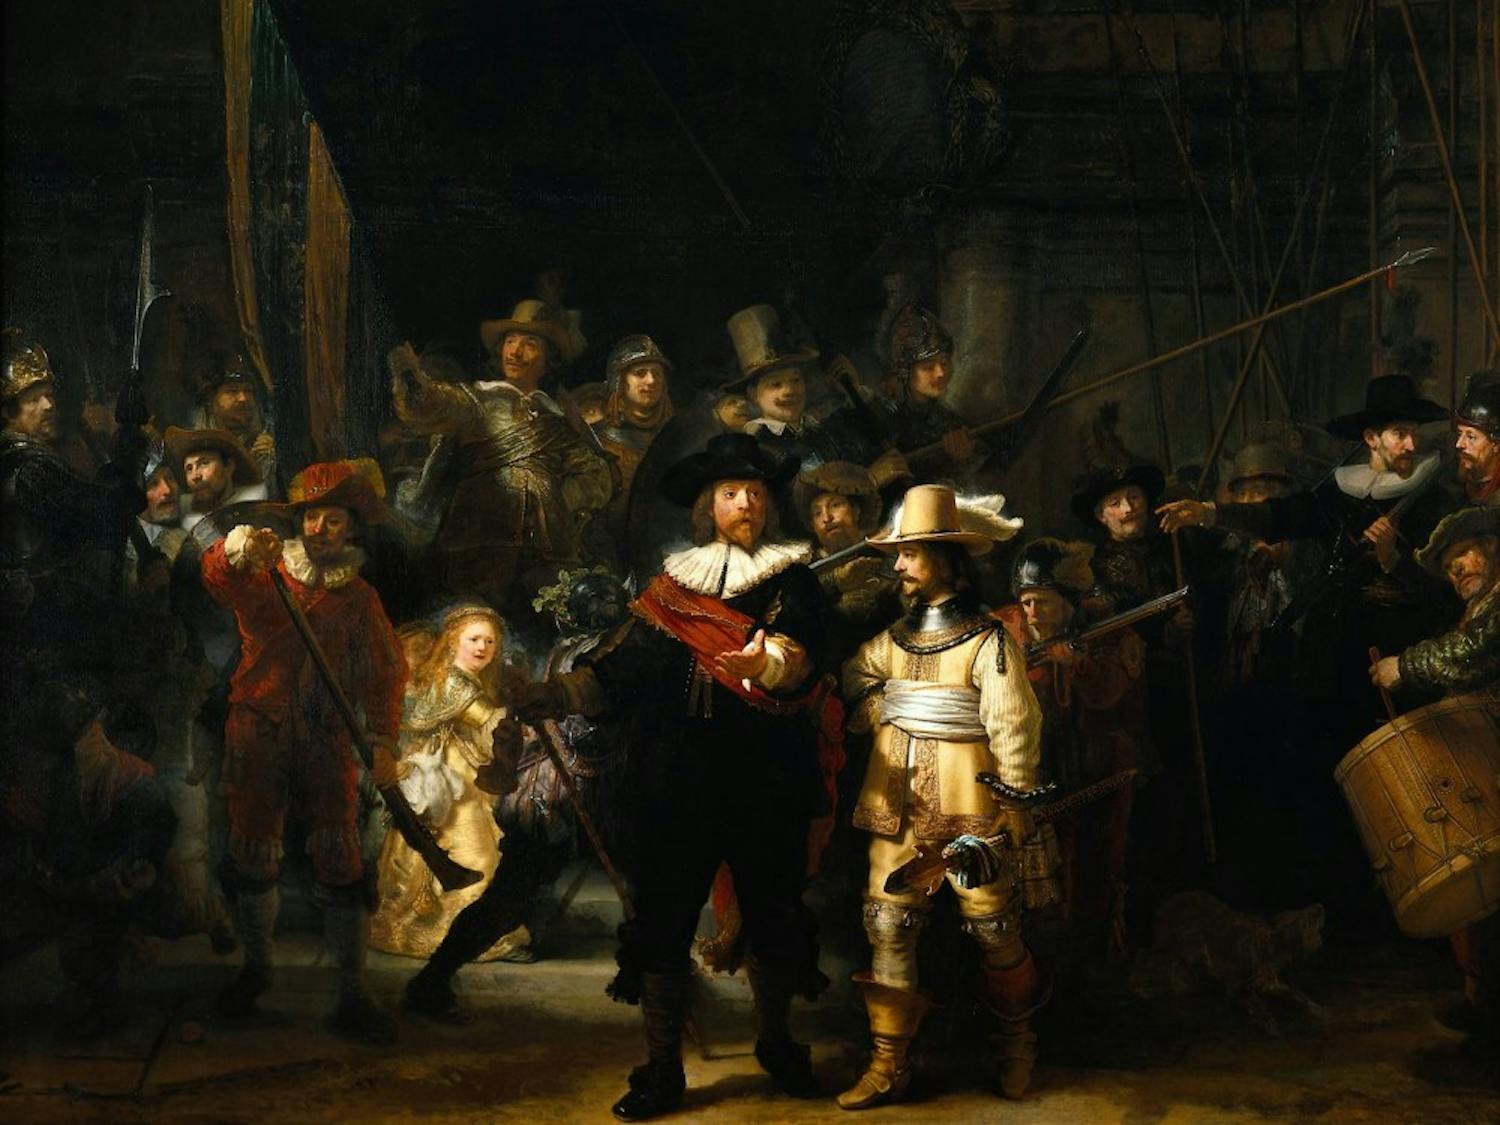 "The Nightwatch" by Rembrandt.